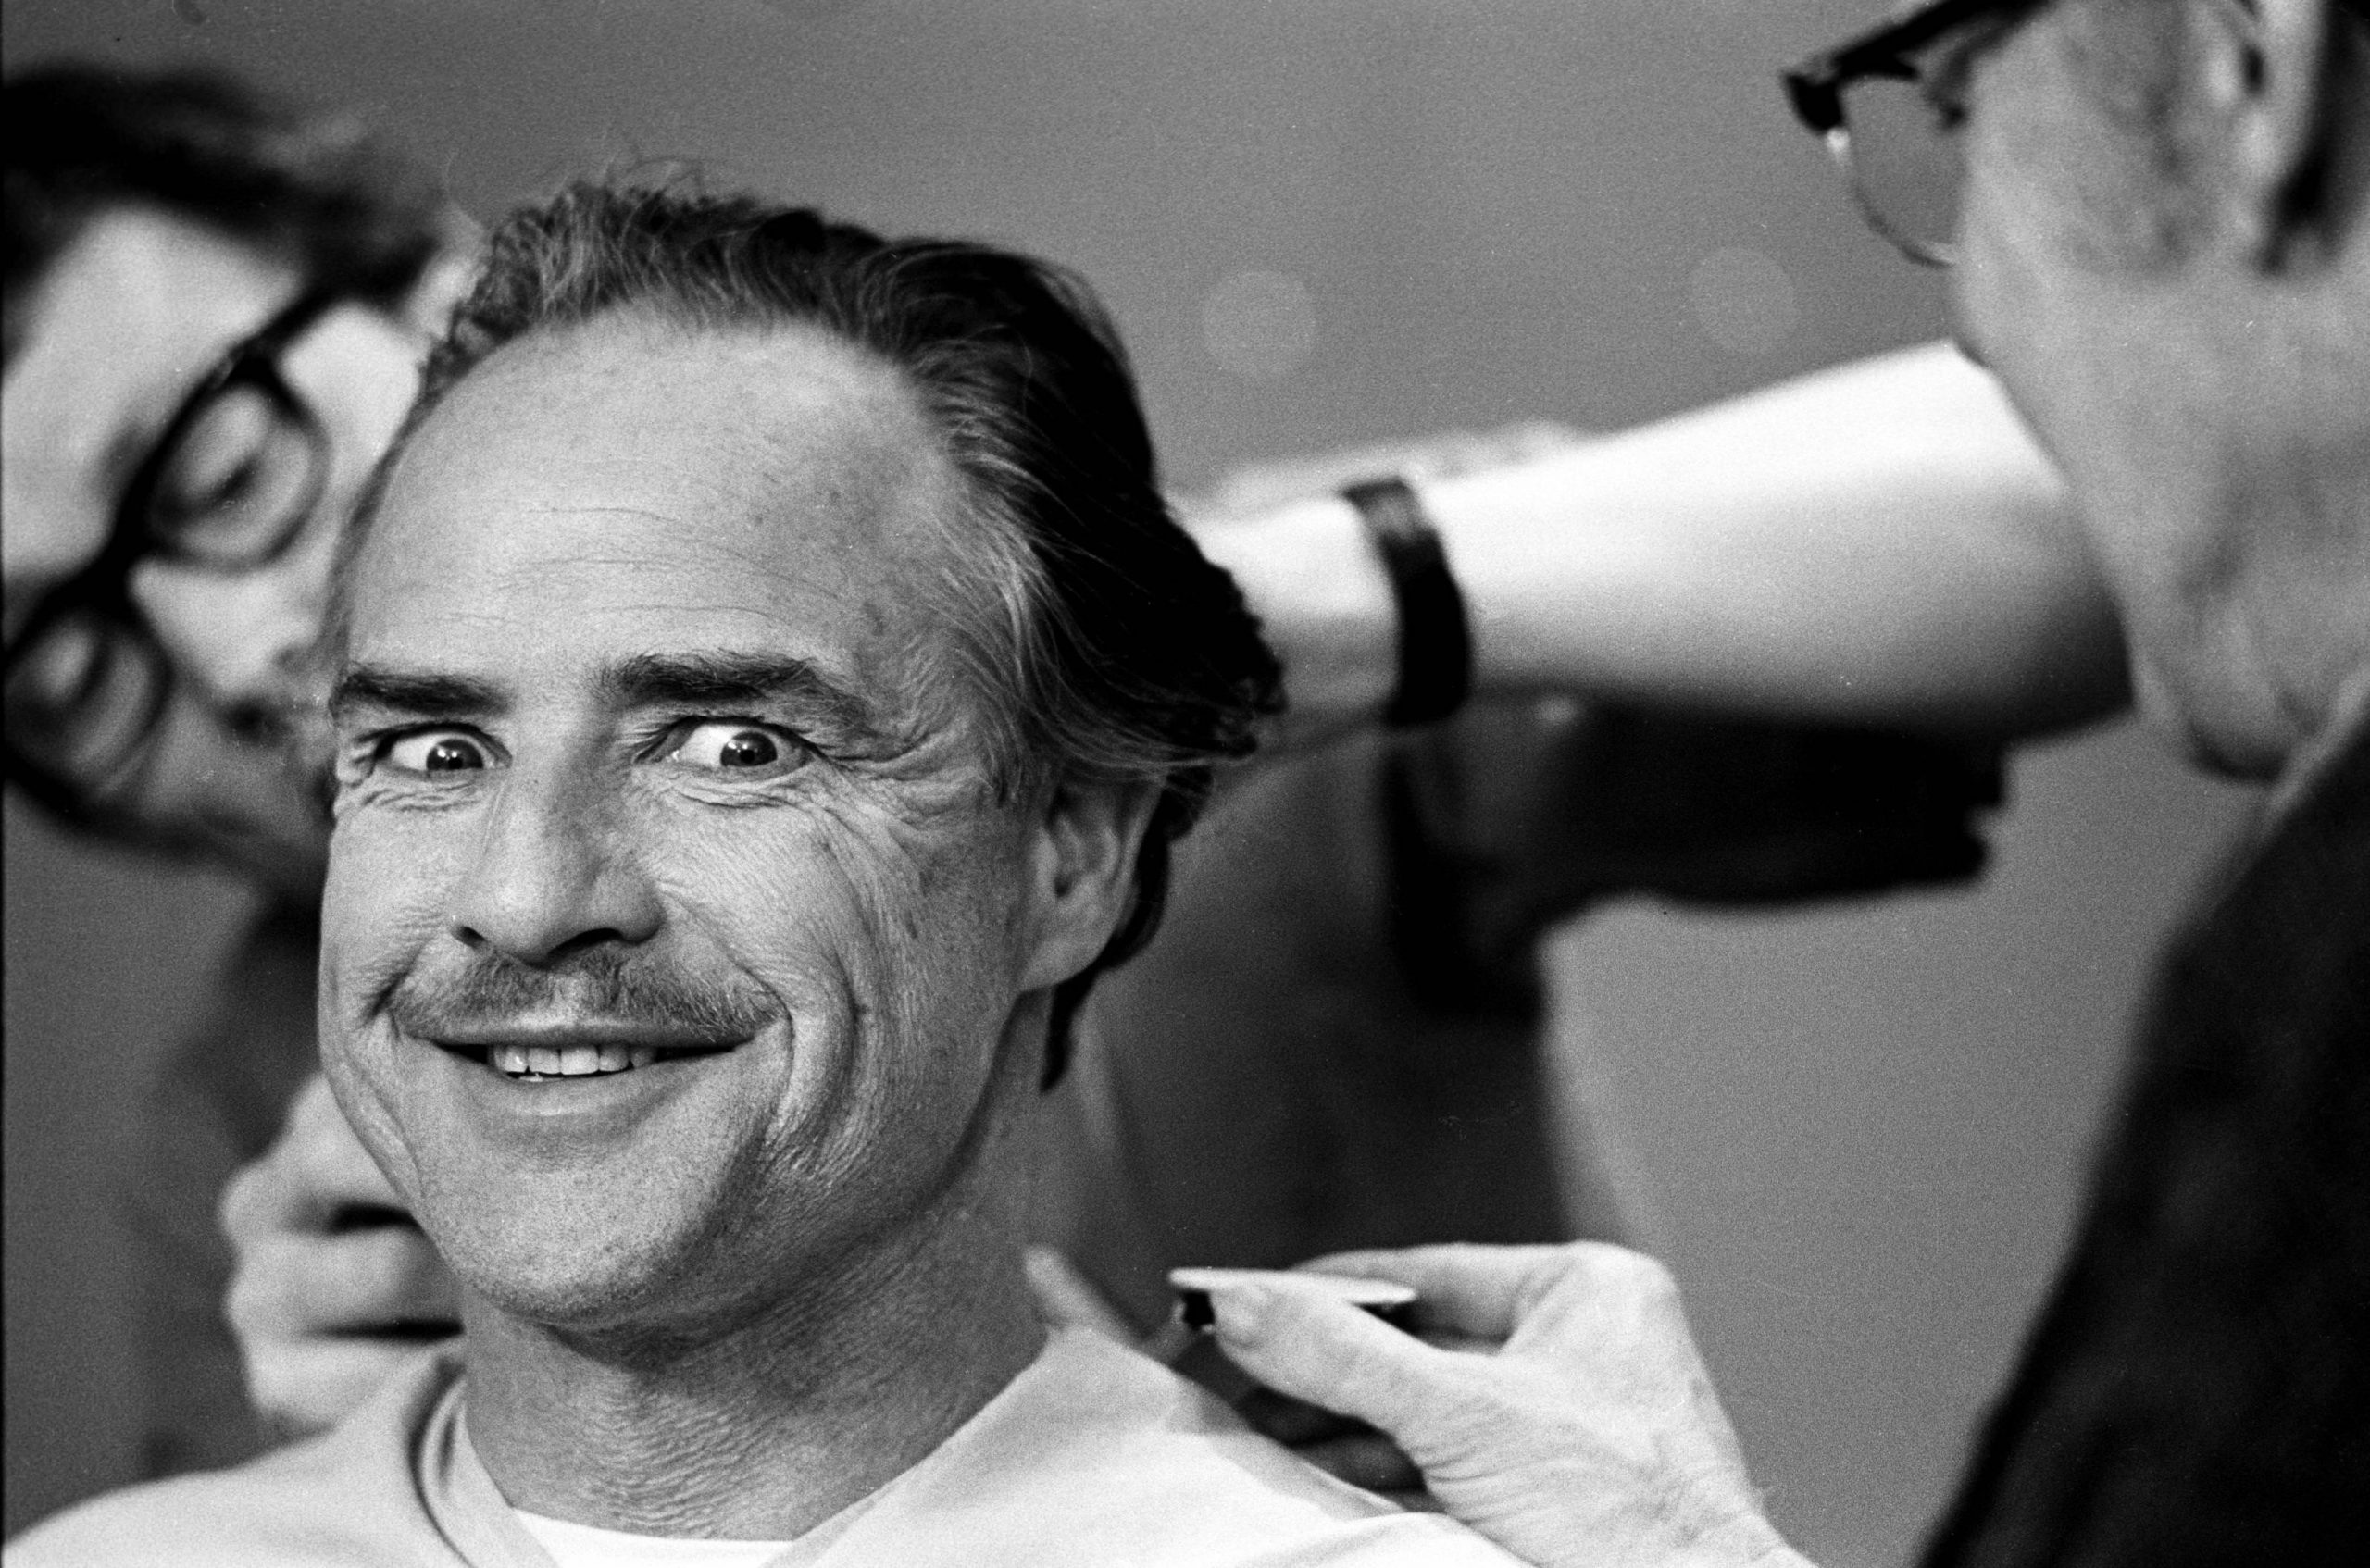 Marlon Brando grinning devilishly while getting his make-up done during the filming of The Godfather in New York, 1971